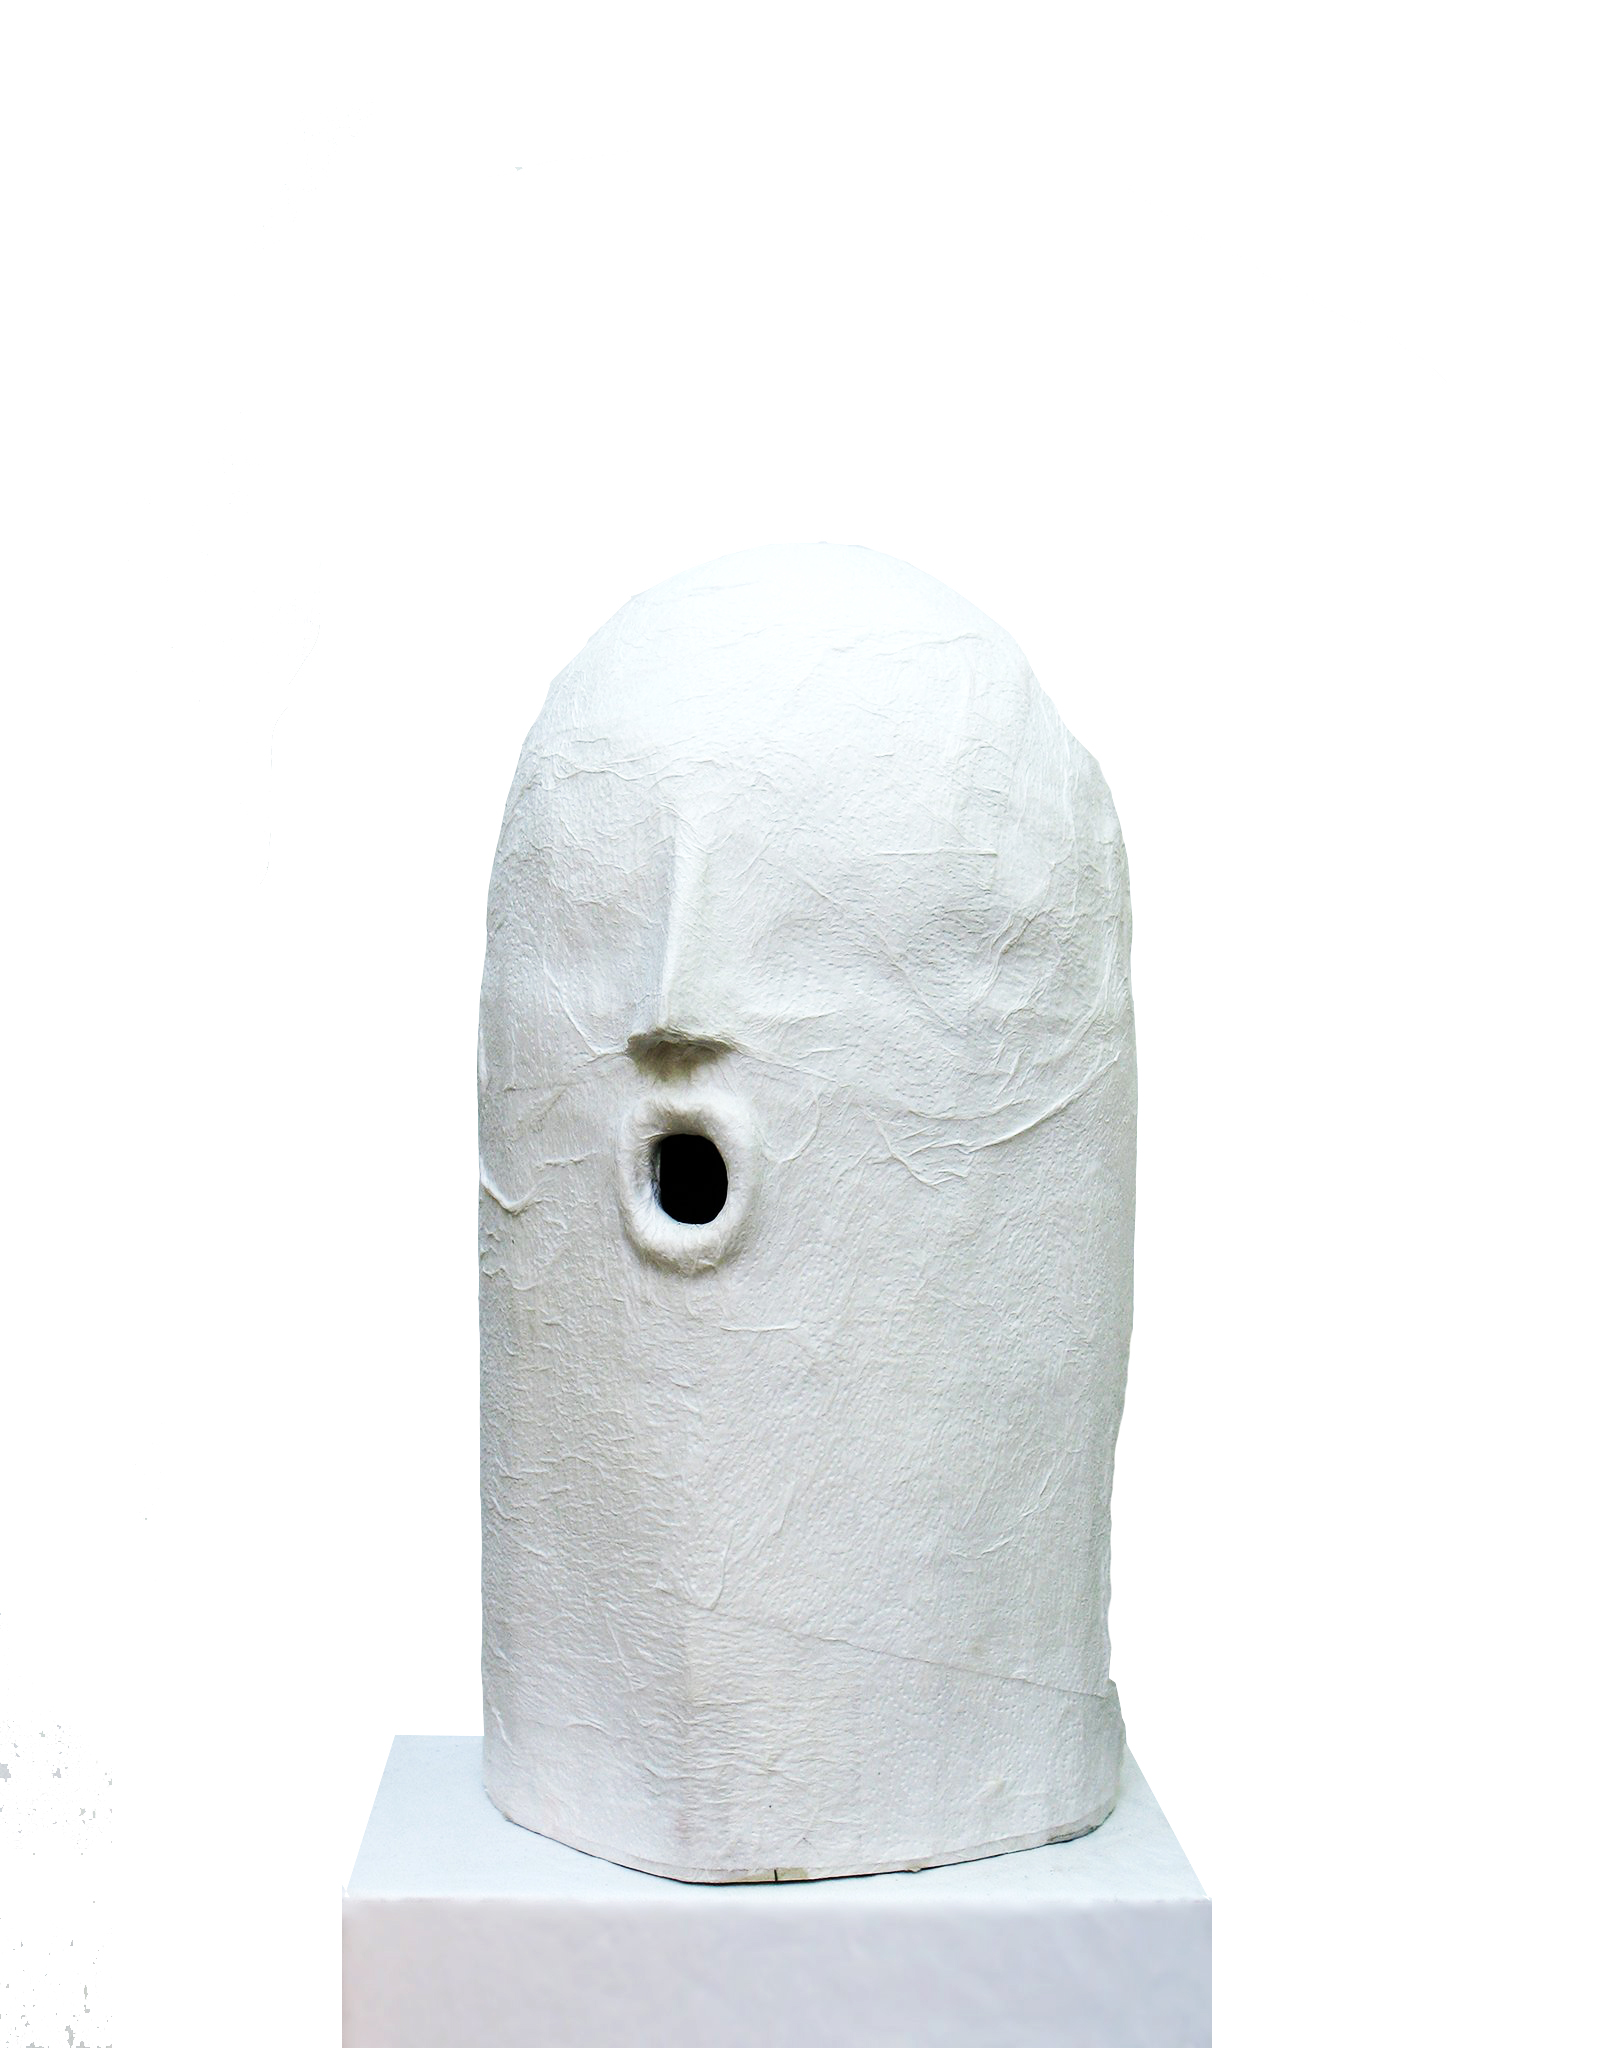 David Harrison One in the Eye (Mobile Glory Hole), 2012 Paper towels, cardboard and mixed media 44 x 22 x 24 cm 17 3/8 x 8 5/8 x 9 1/2 in